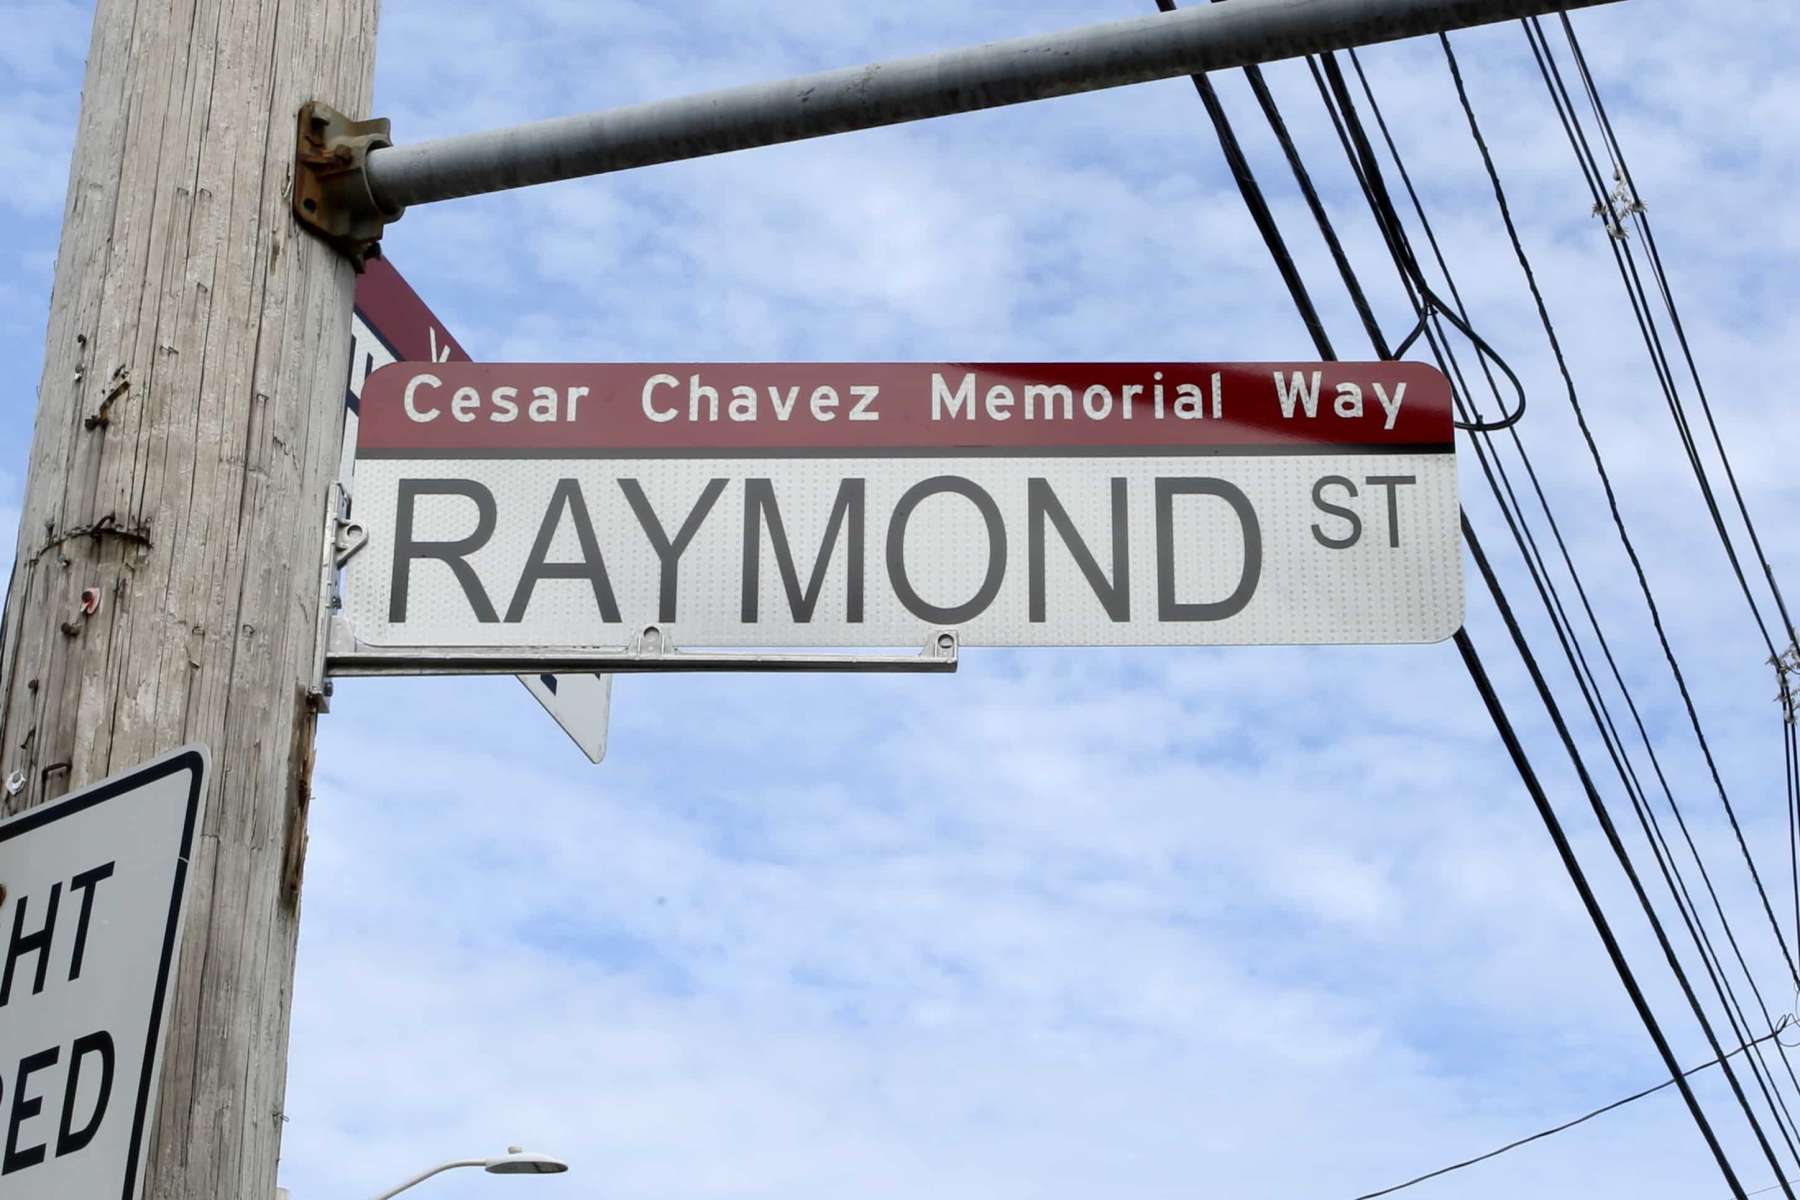 Rhode Island News: Providence dedicates Cesar Chavez Memorial Way to late civil rights and labor leader